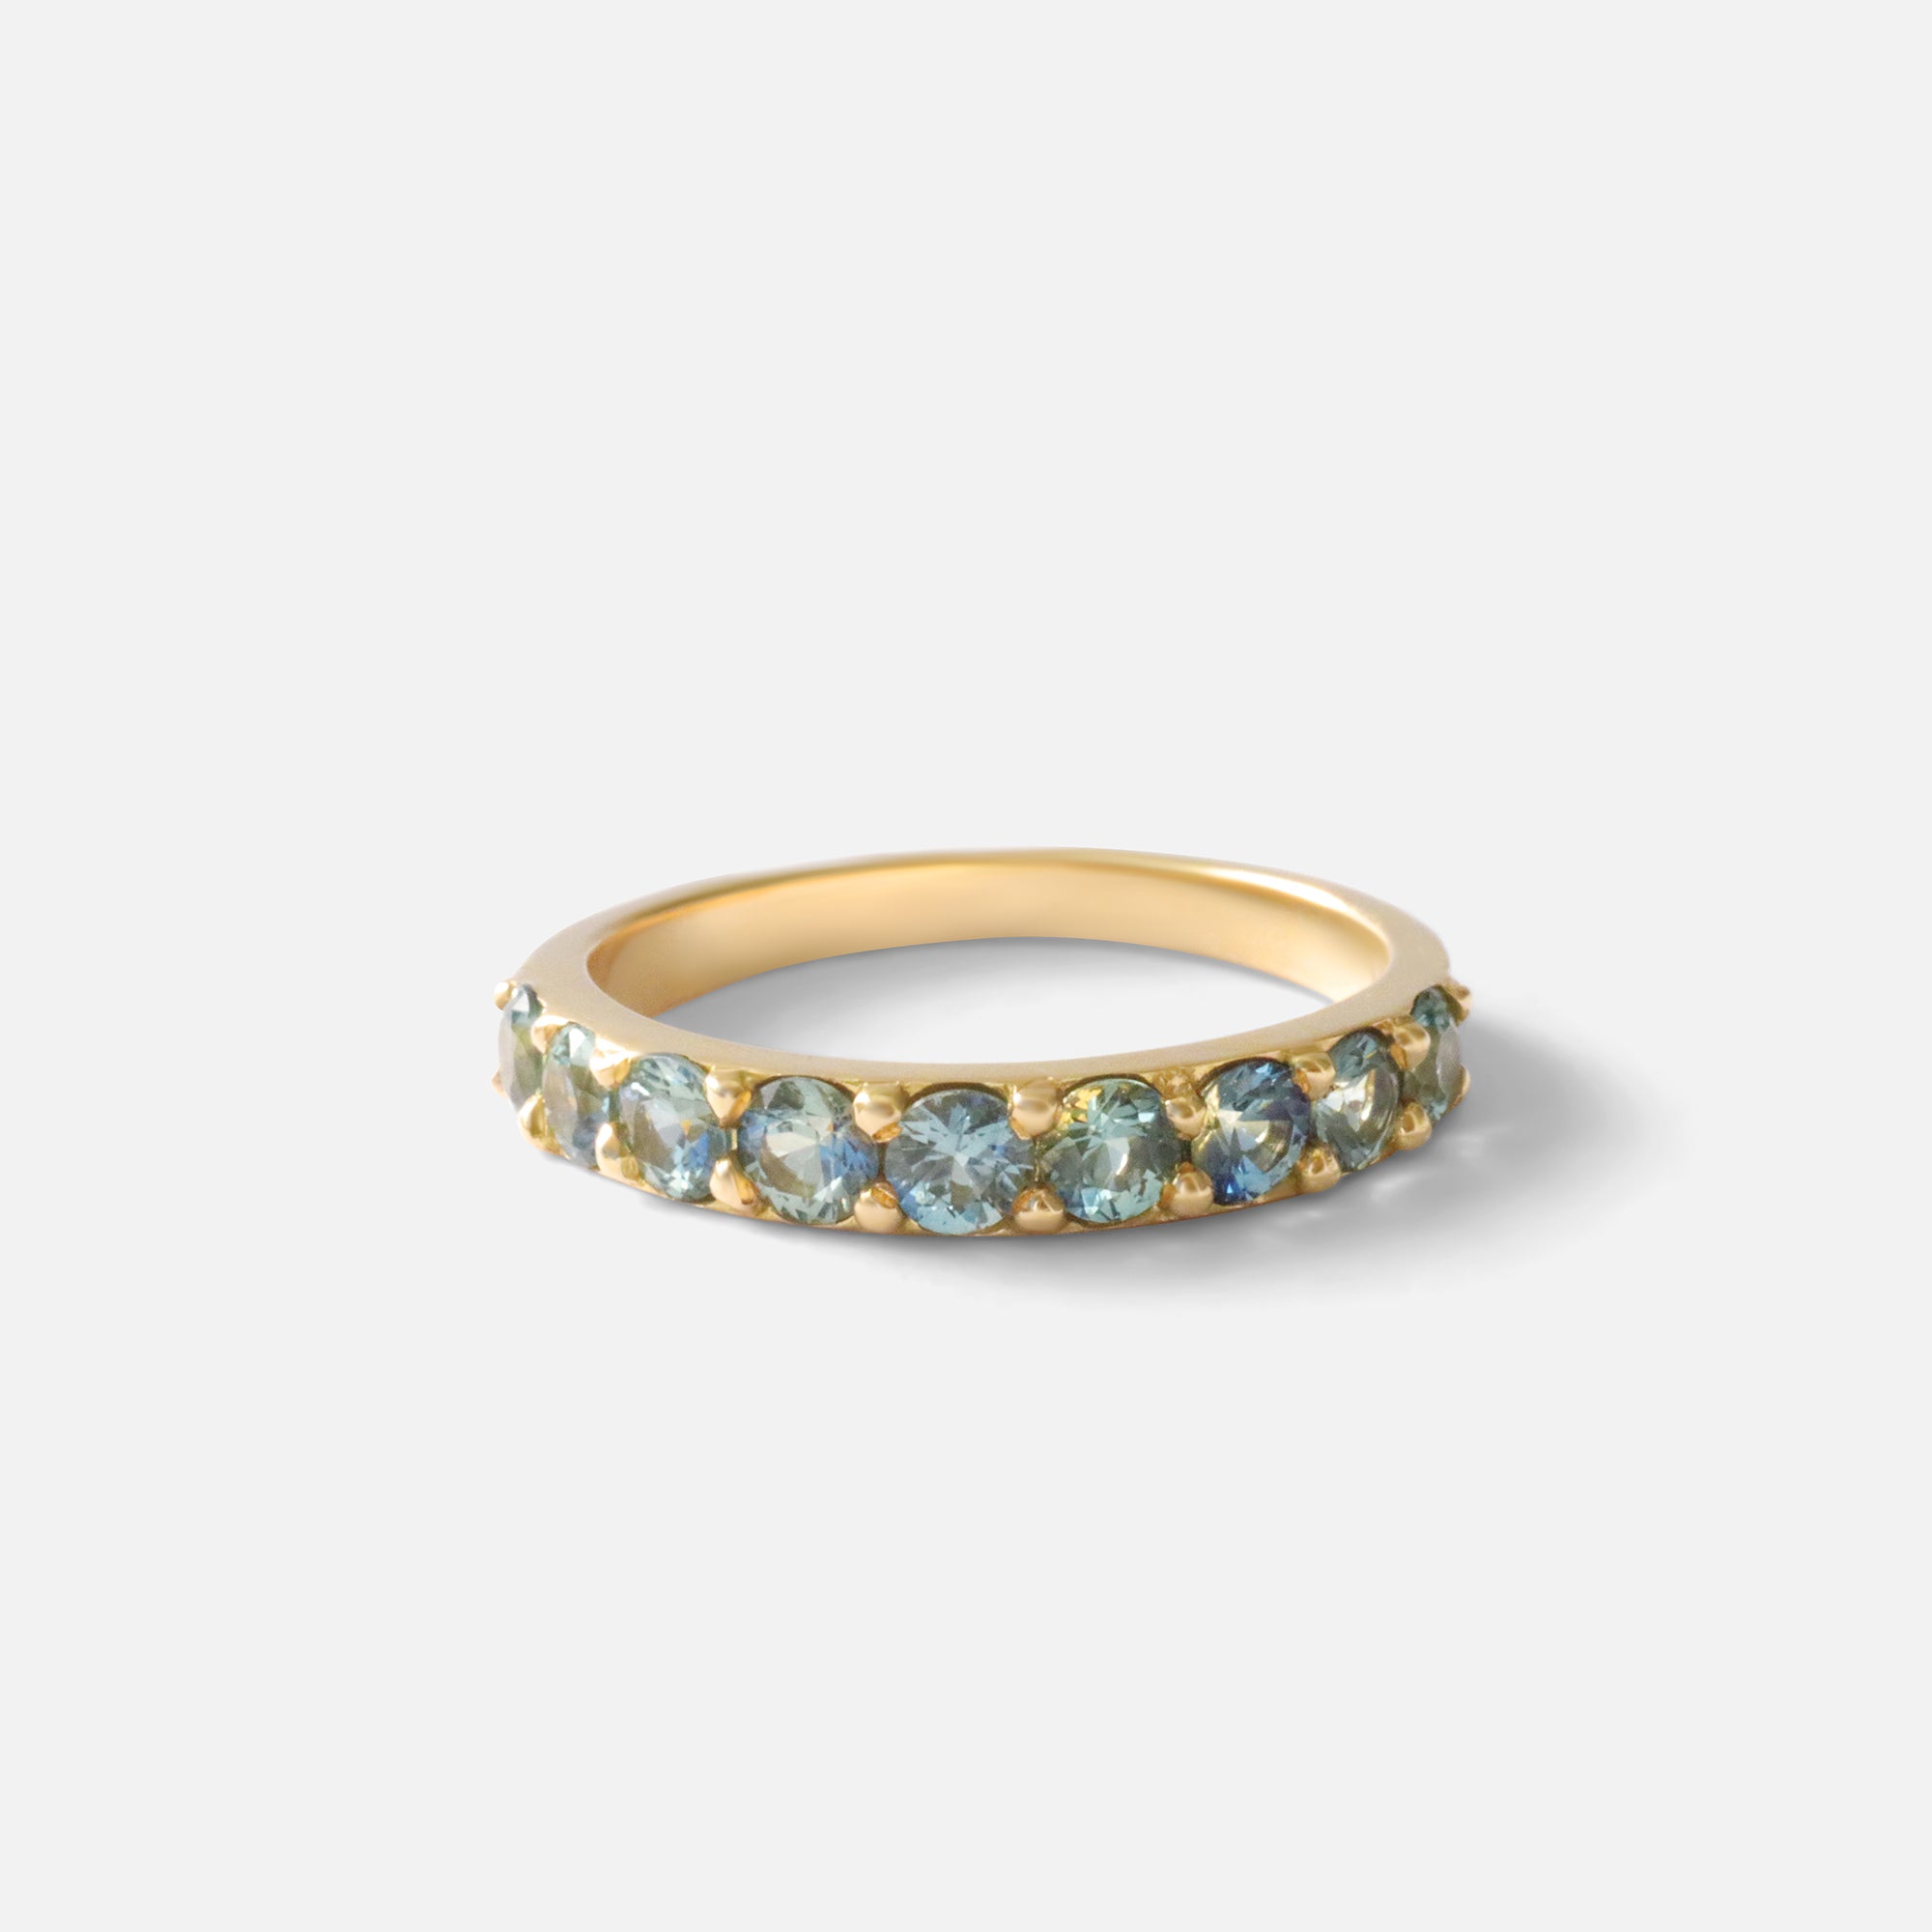 Dew 3mm / Teal Sapphire Ring By Hiroyo in Wedding Bands Category